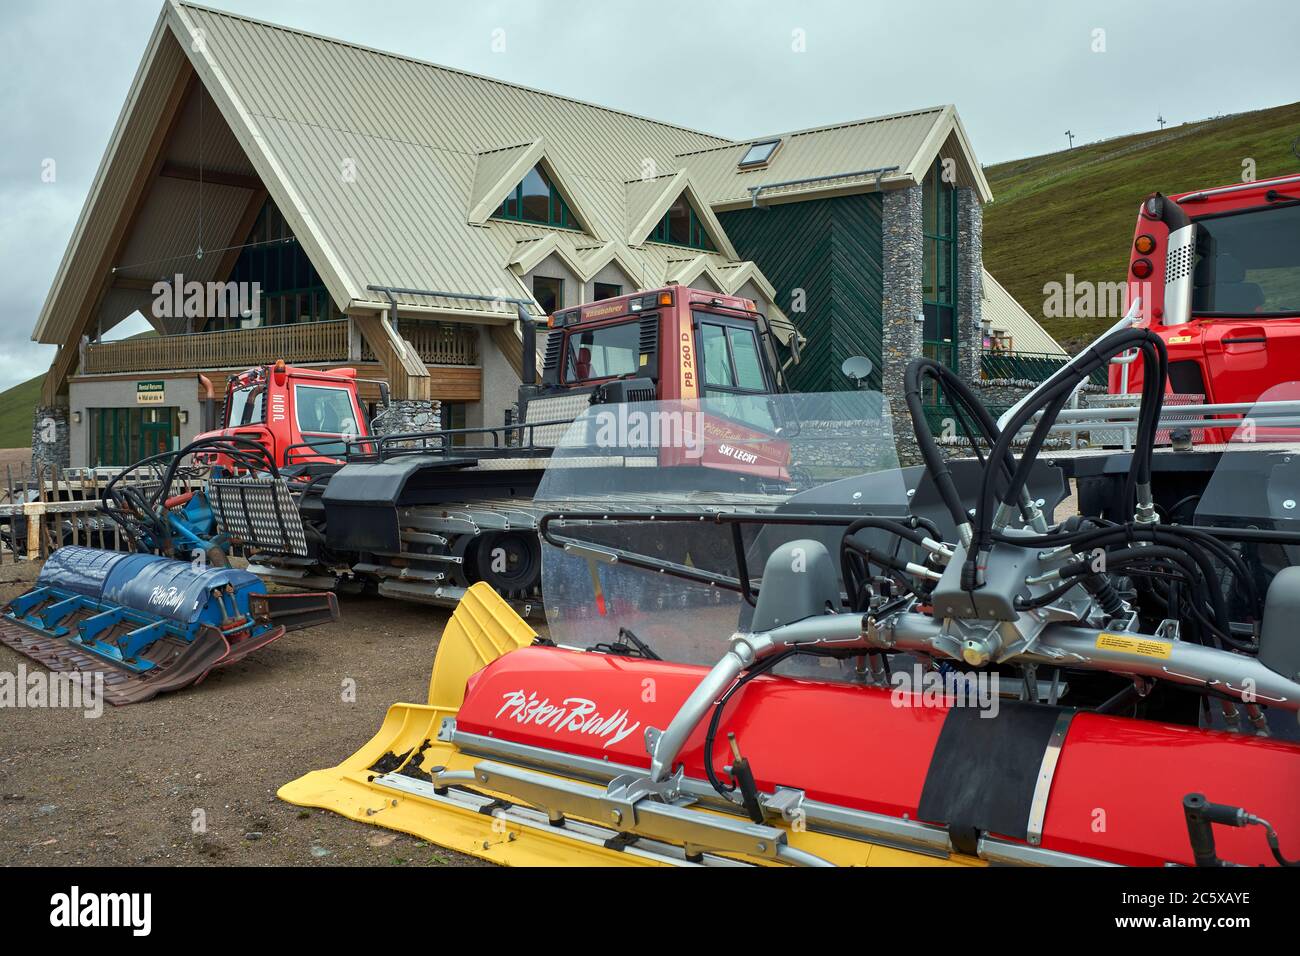 In a wet and gloomy July, Snow cats wait to get into action at the Lecht Ski Centre Stock Photo